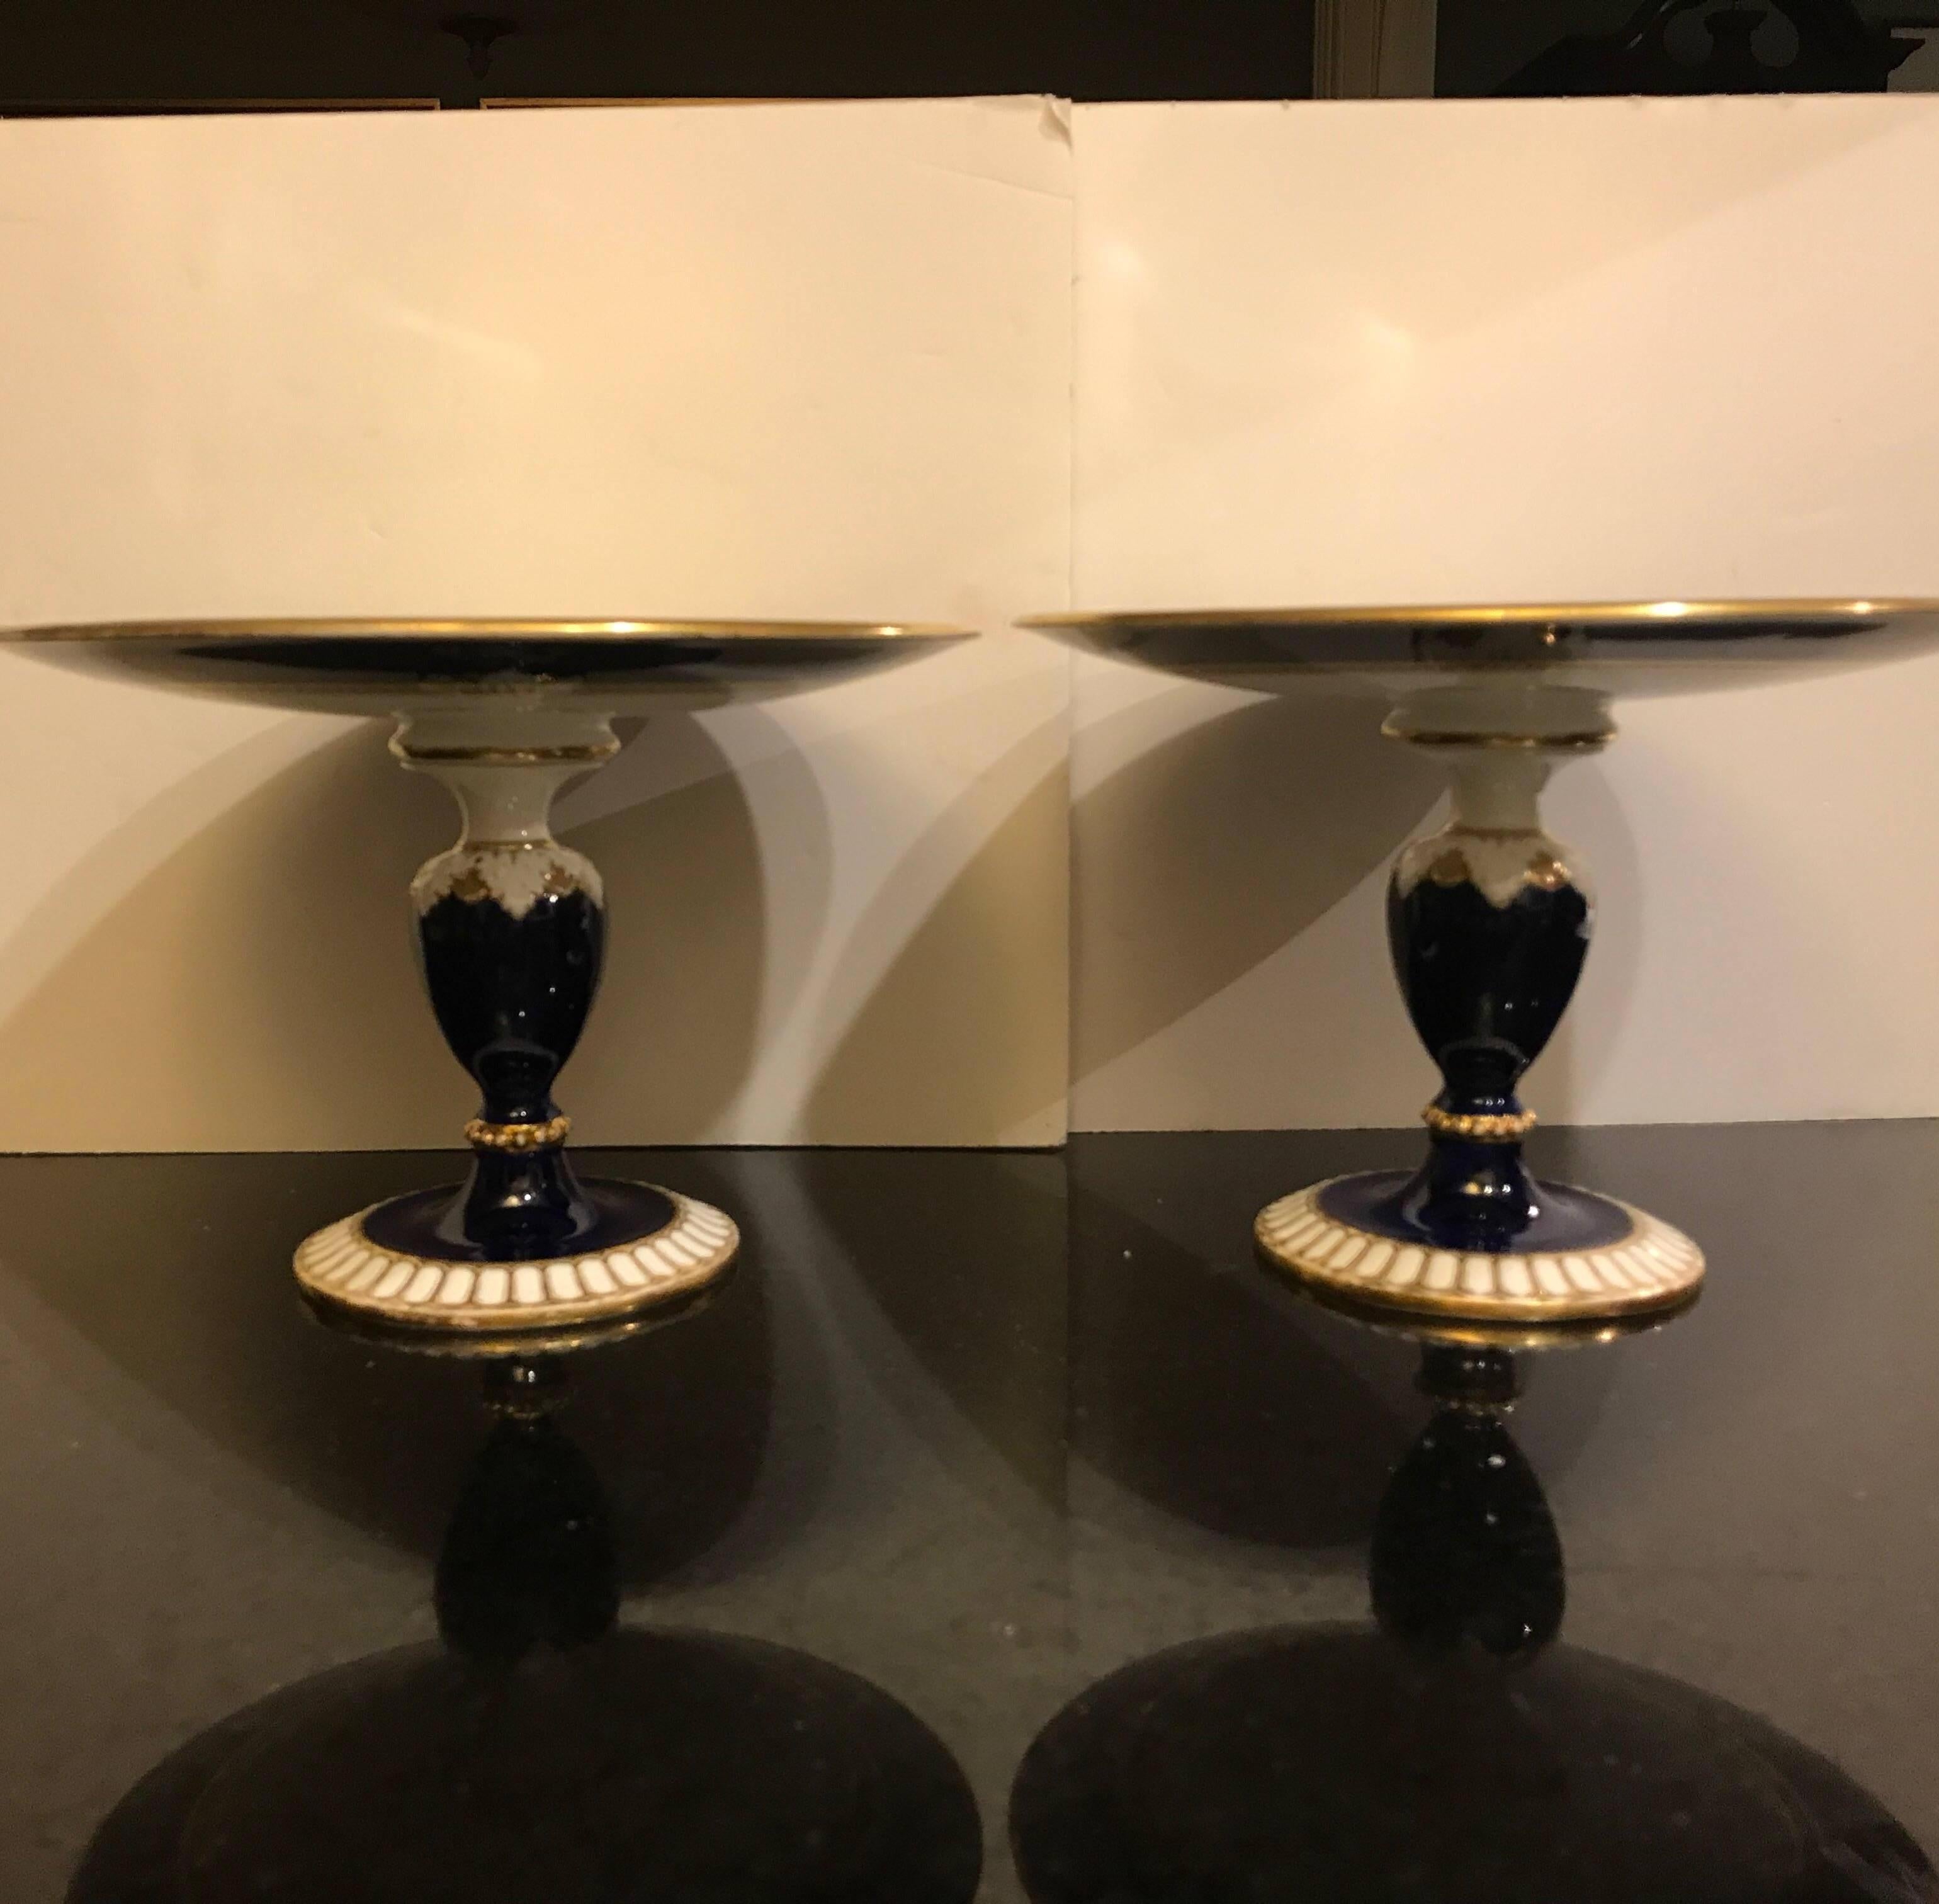 Elegant pair of porcelain compotes with had painted gilt decoration, the cobalt bases with gilt trim with upper white and cobalt dish tops. The compotes are just under the size of a luncheon plate at 9.5 inches.